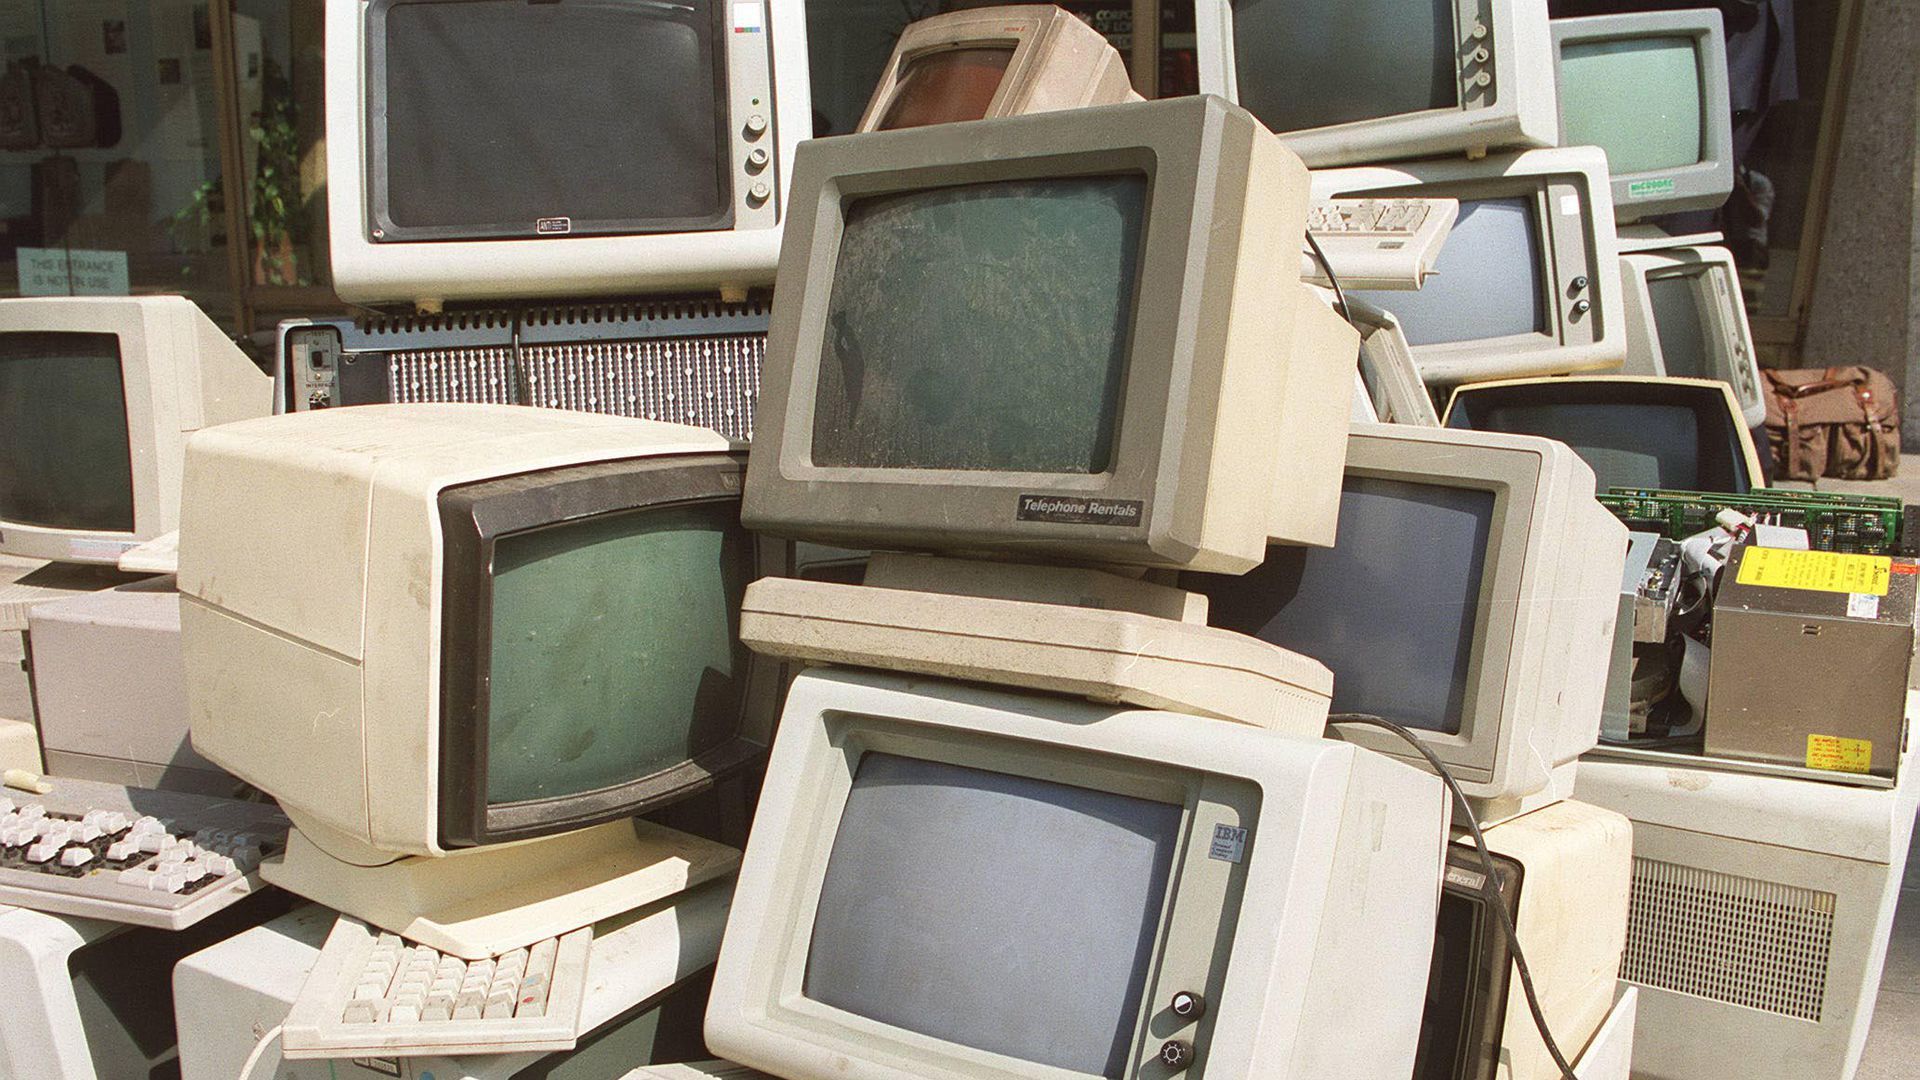 A heap of old computer monitors from the '80s ands '90s